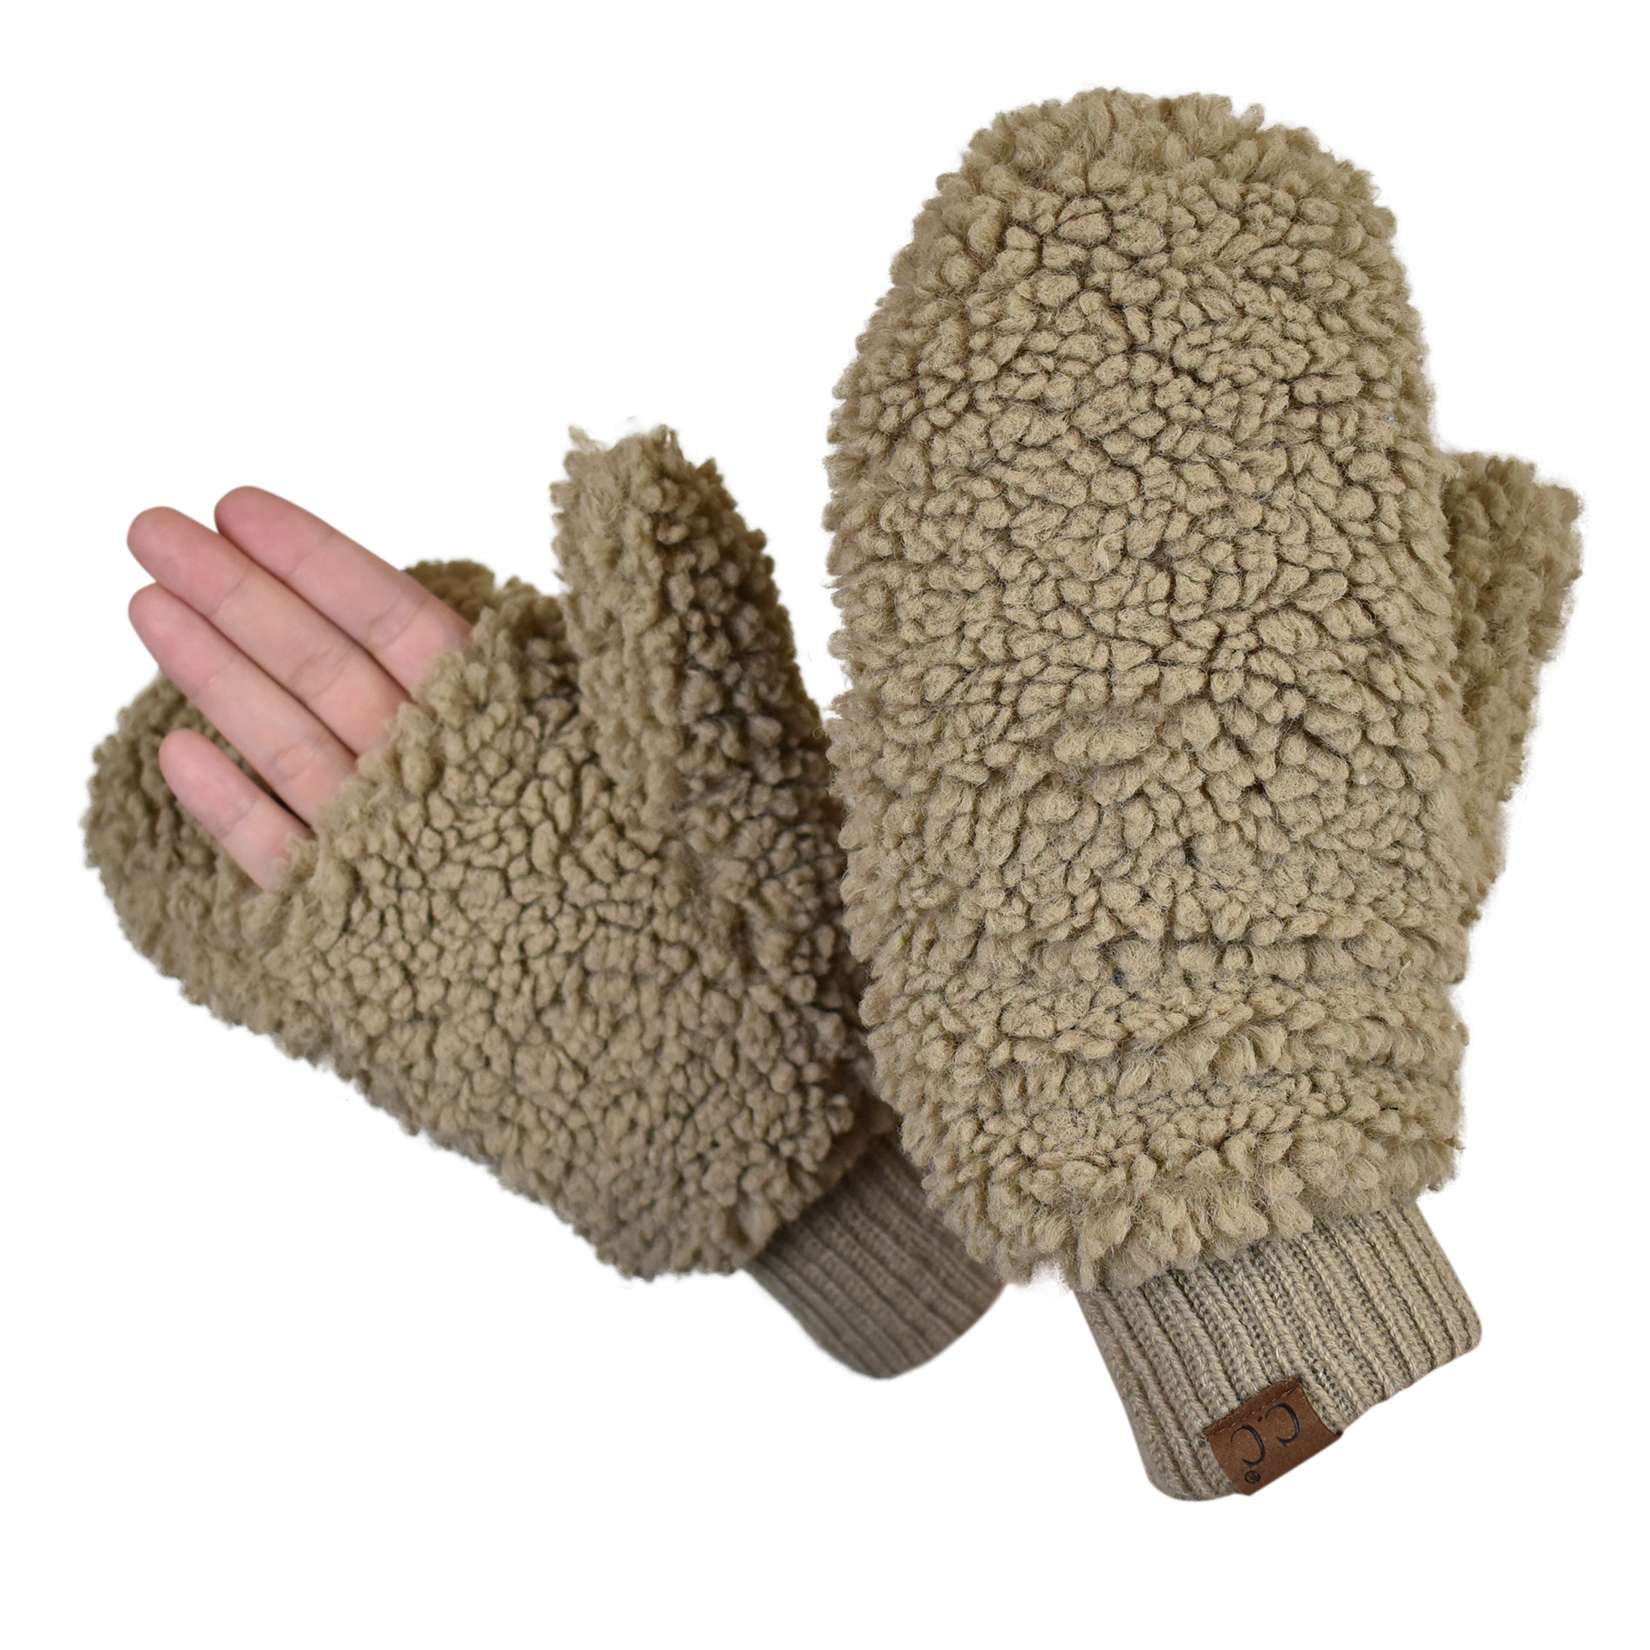 CHSDCSI Female Mittens Guantes Mujer High Quality Fashion Suede